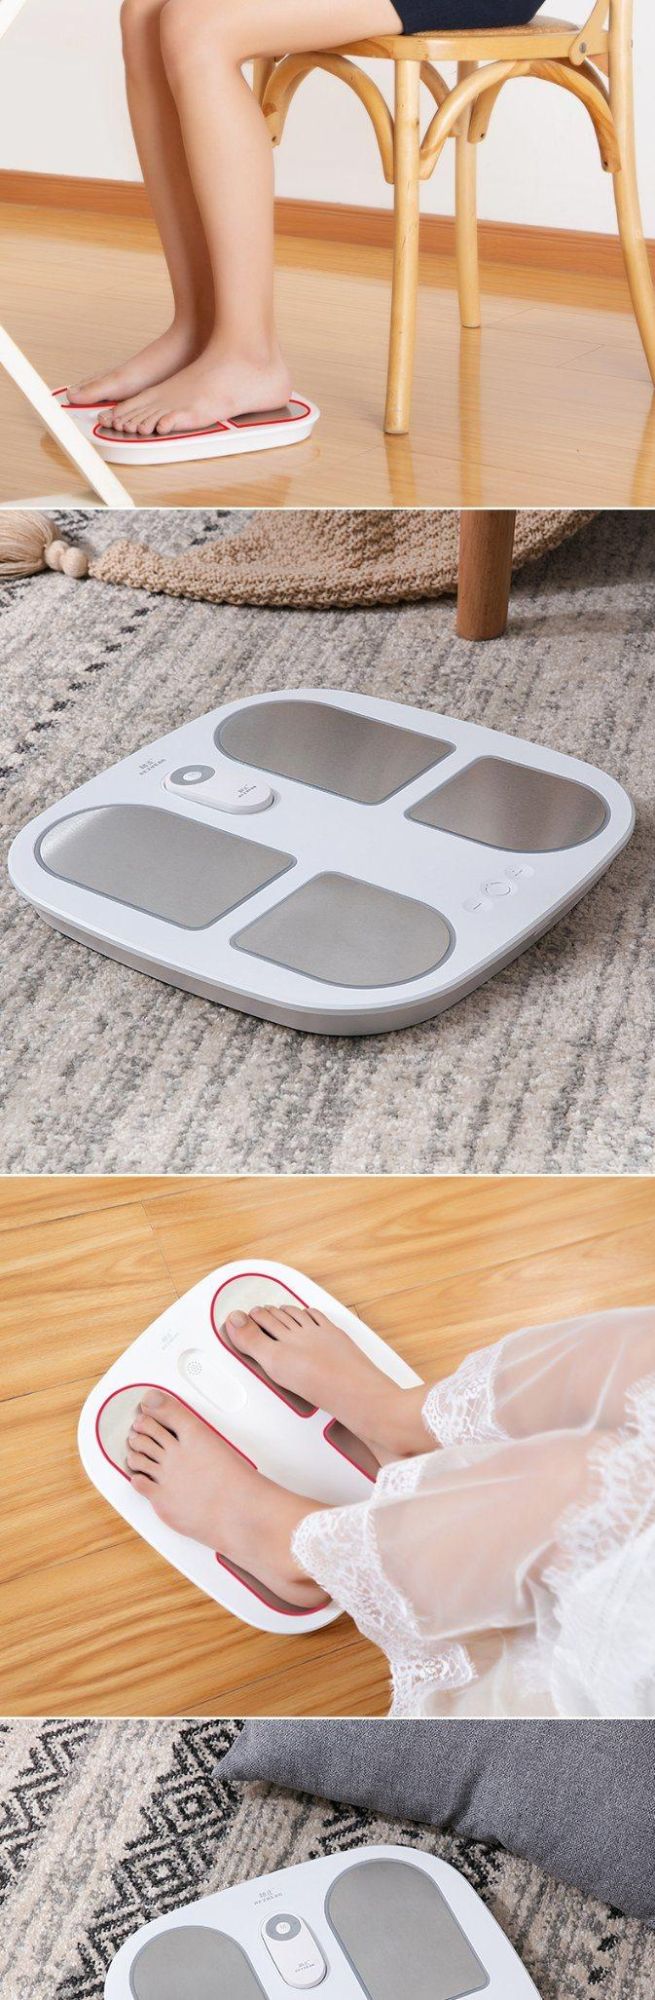 Hezheng Electric EMS Pulse Foot Warmer Heating Feet Massager with Remote Control